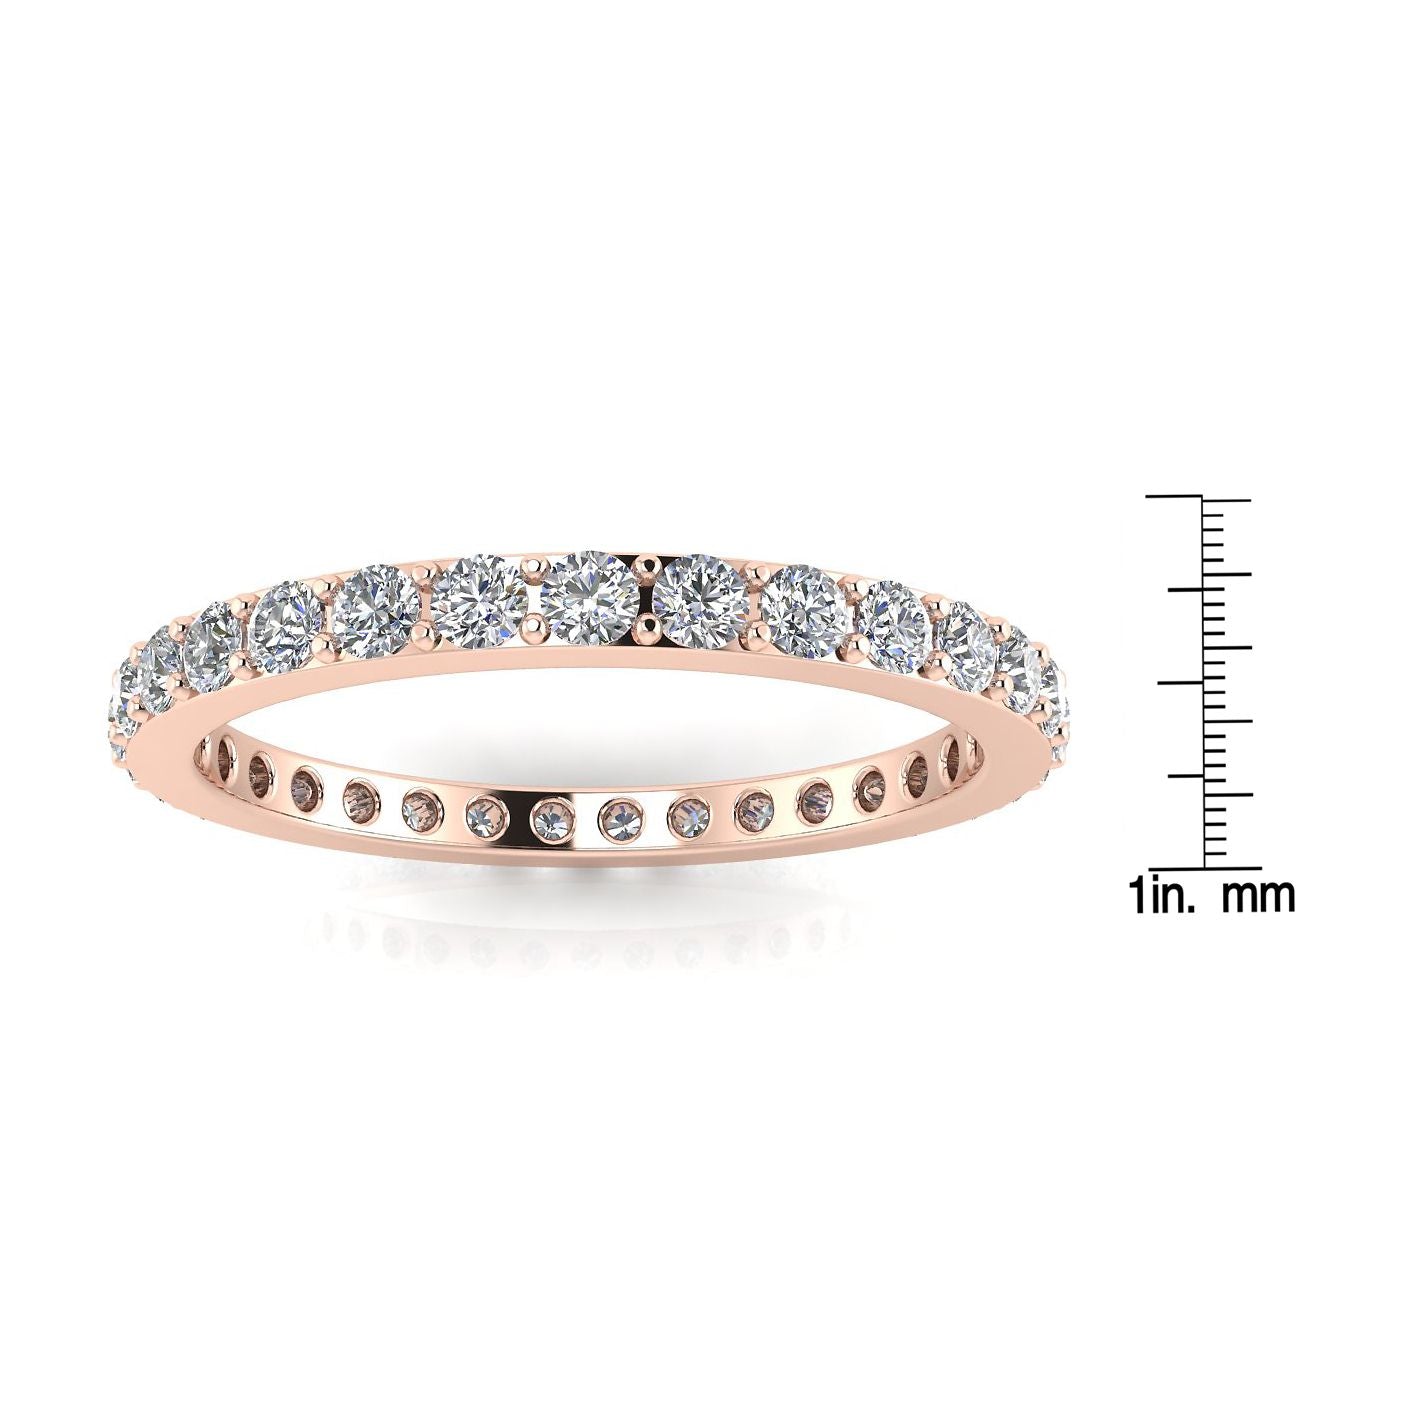 Round Brilliant Cut Diamond Pave Set Eternity Ring In 14k Rose Gold  (1.43ct. Tw.) Ring Size 5.5